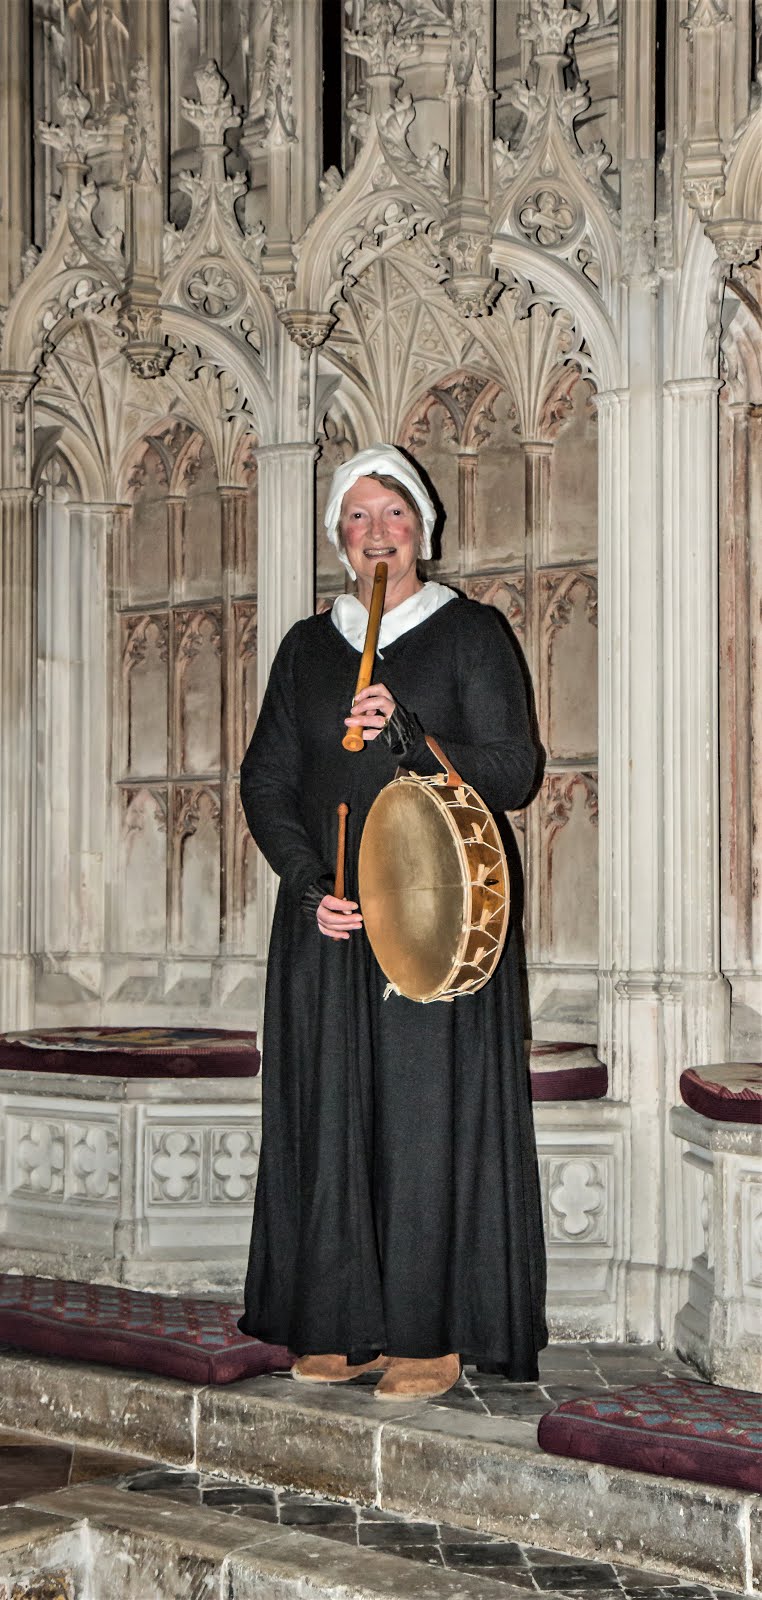 Mediaeval music in Gloucester cathedral